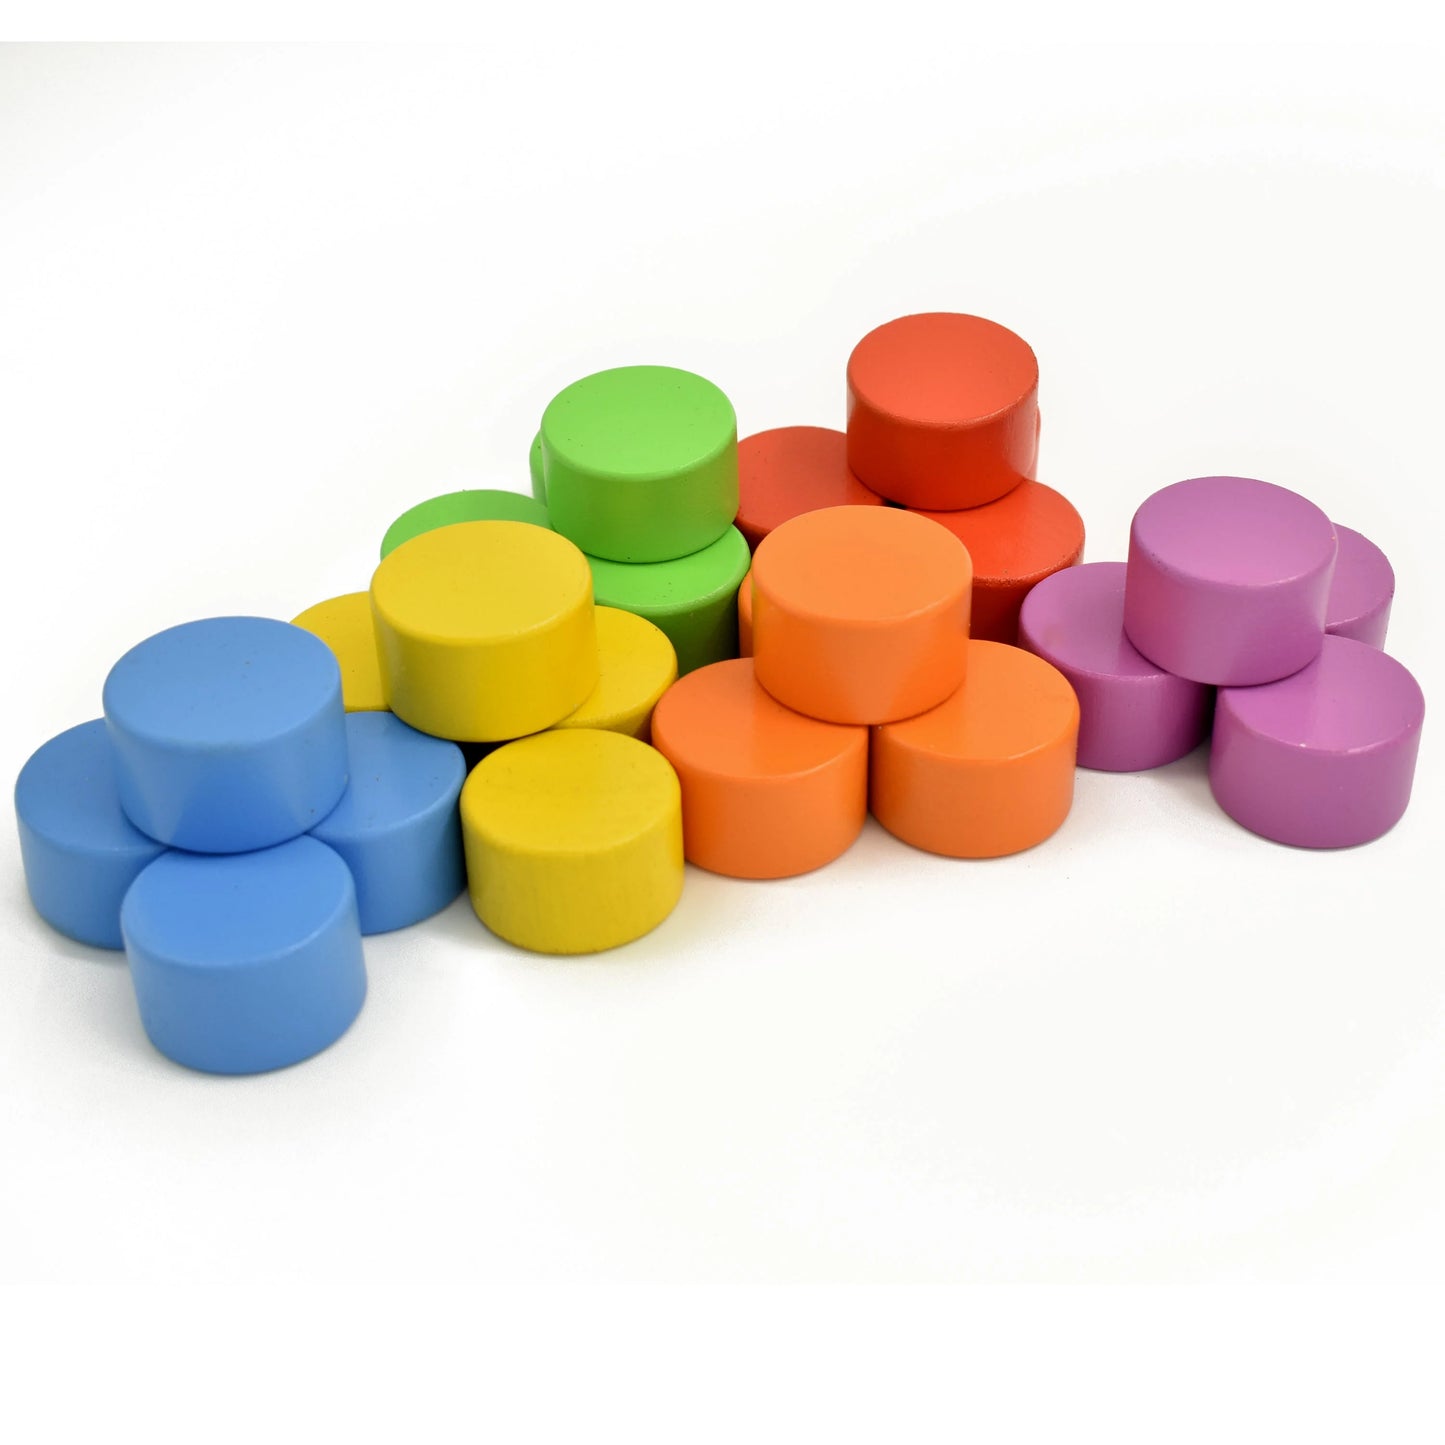 Buy Round Wooden Block Play Toy - SkilloToys.com